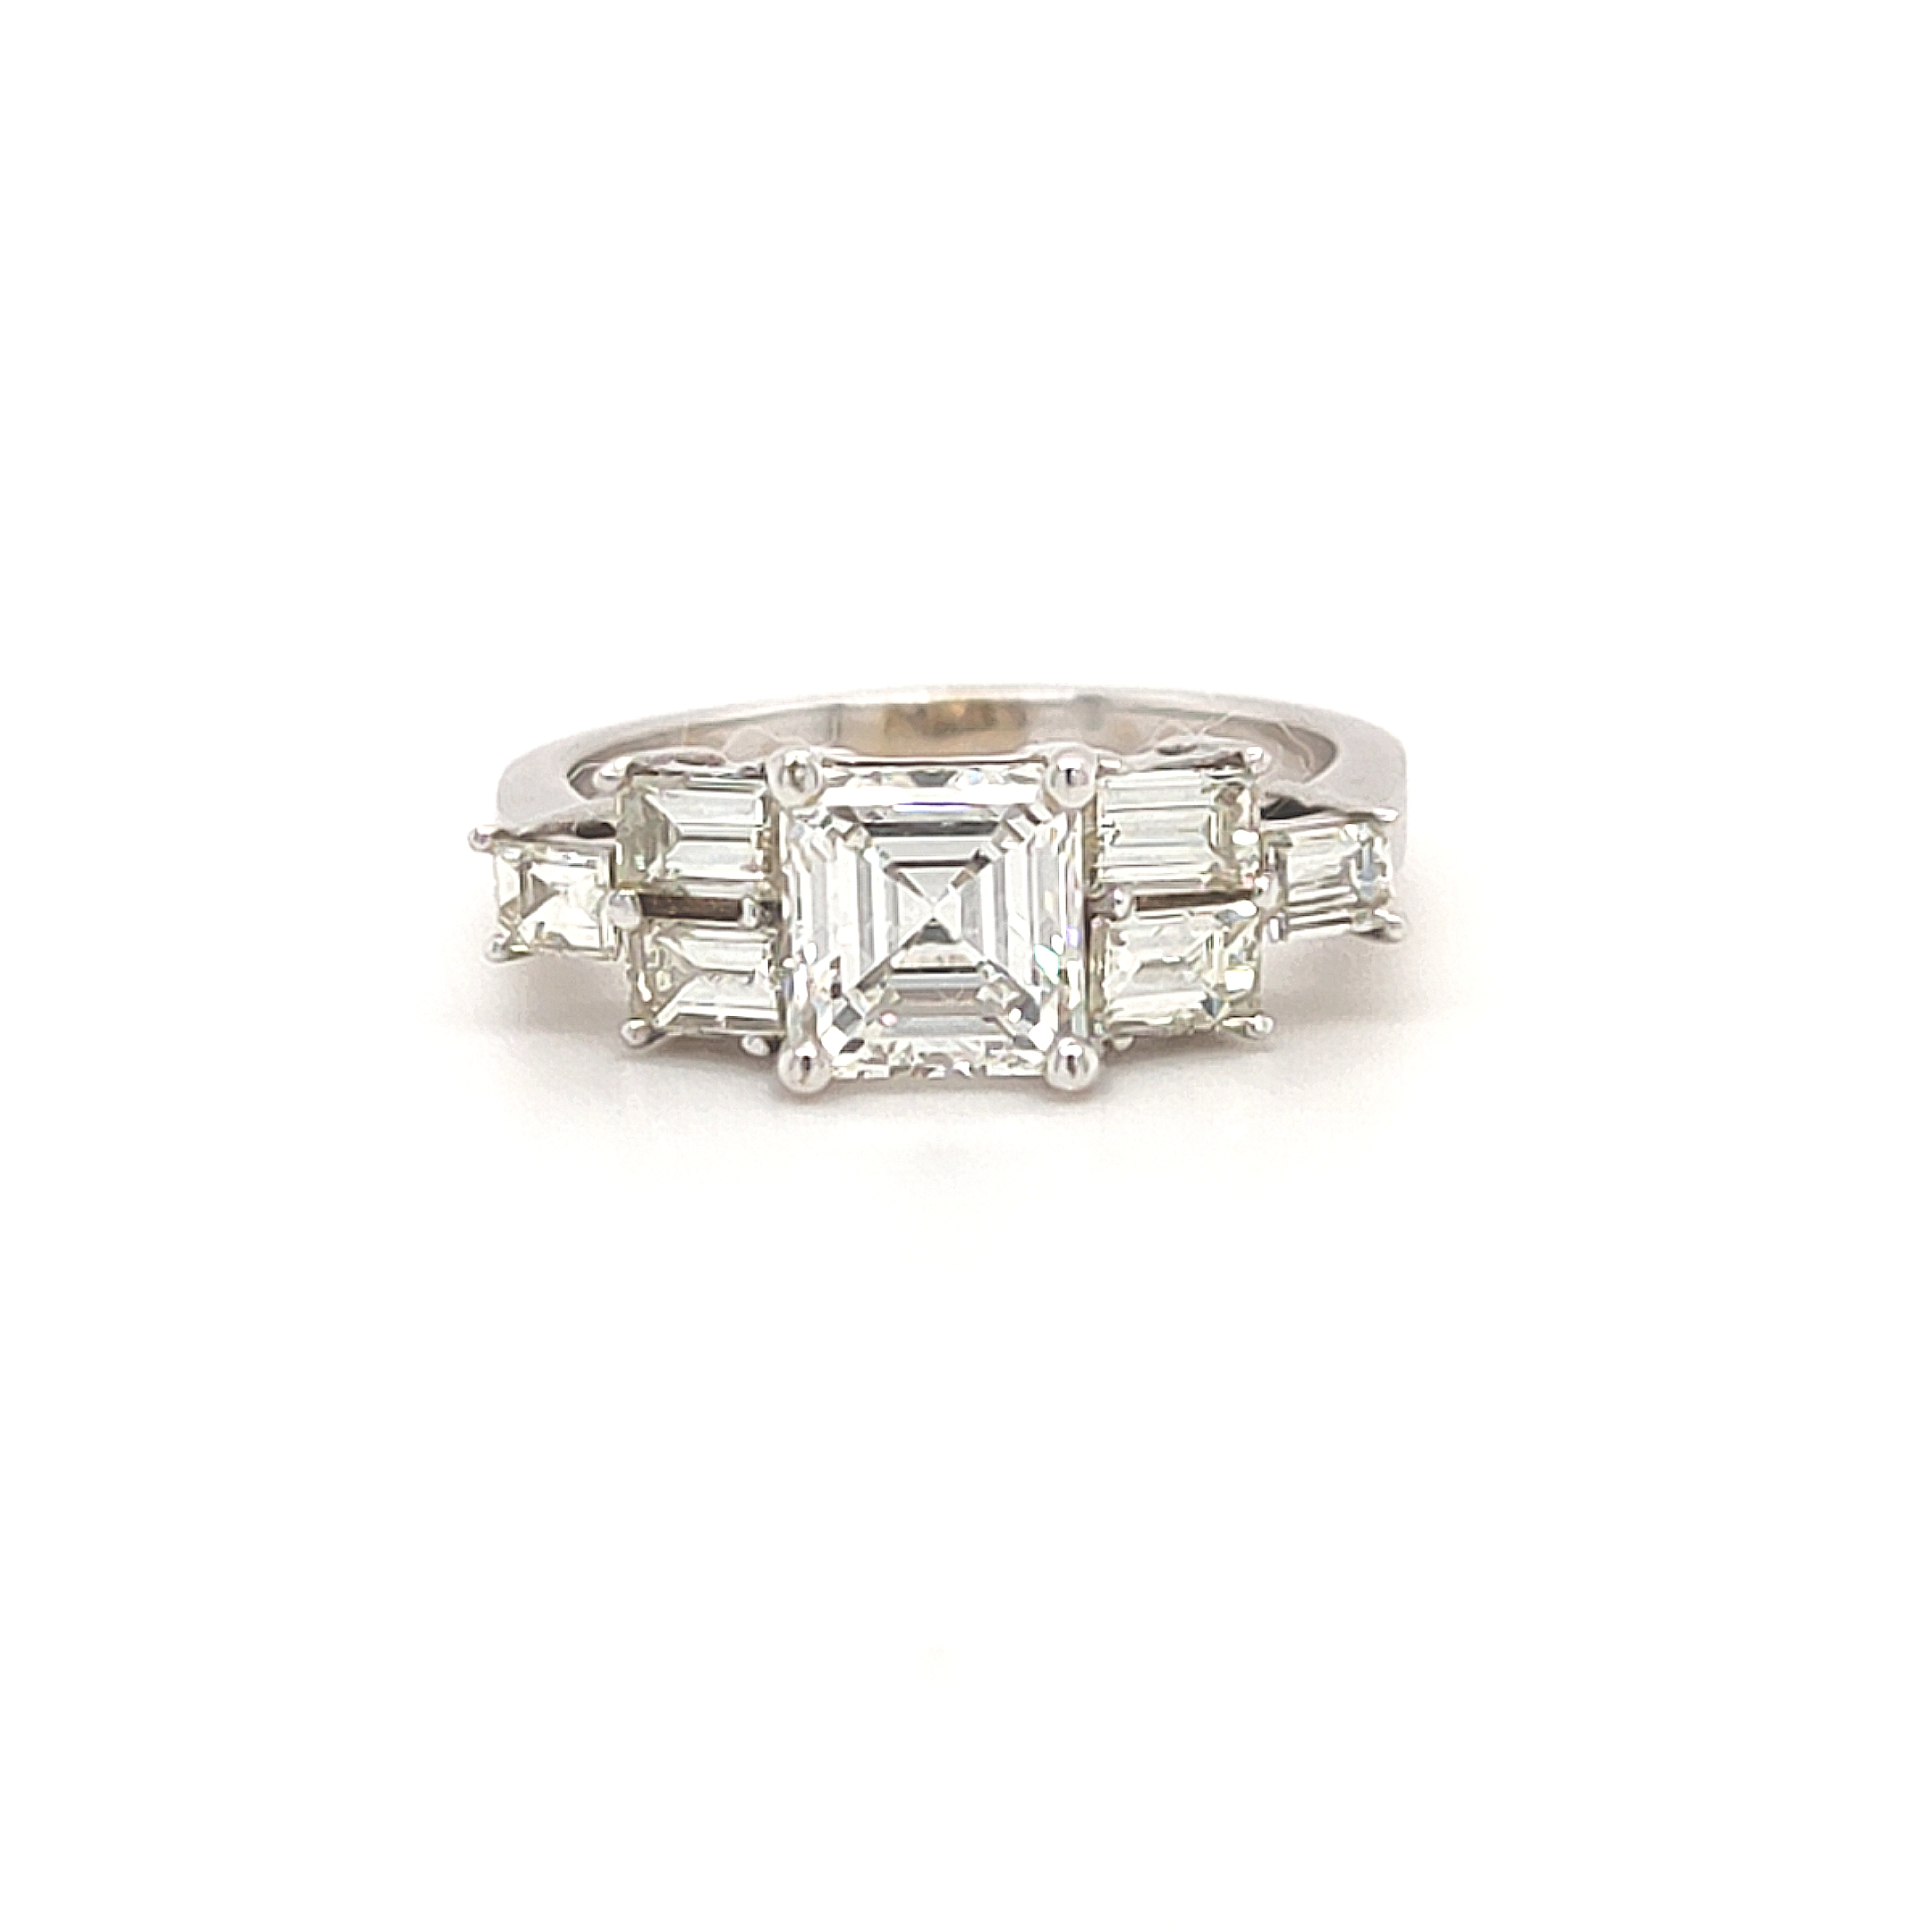 1.28ct, 18ct White Gold Octagonal Cut Diamond Ring with Baguette Cut Shoulders